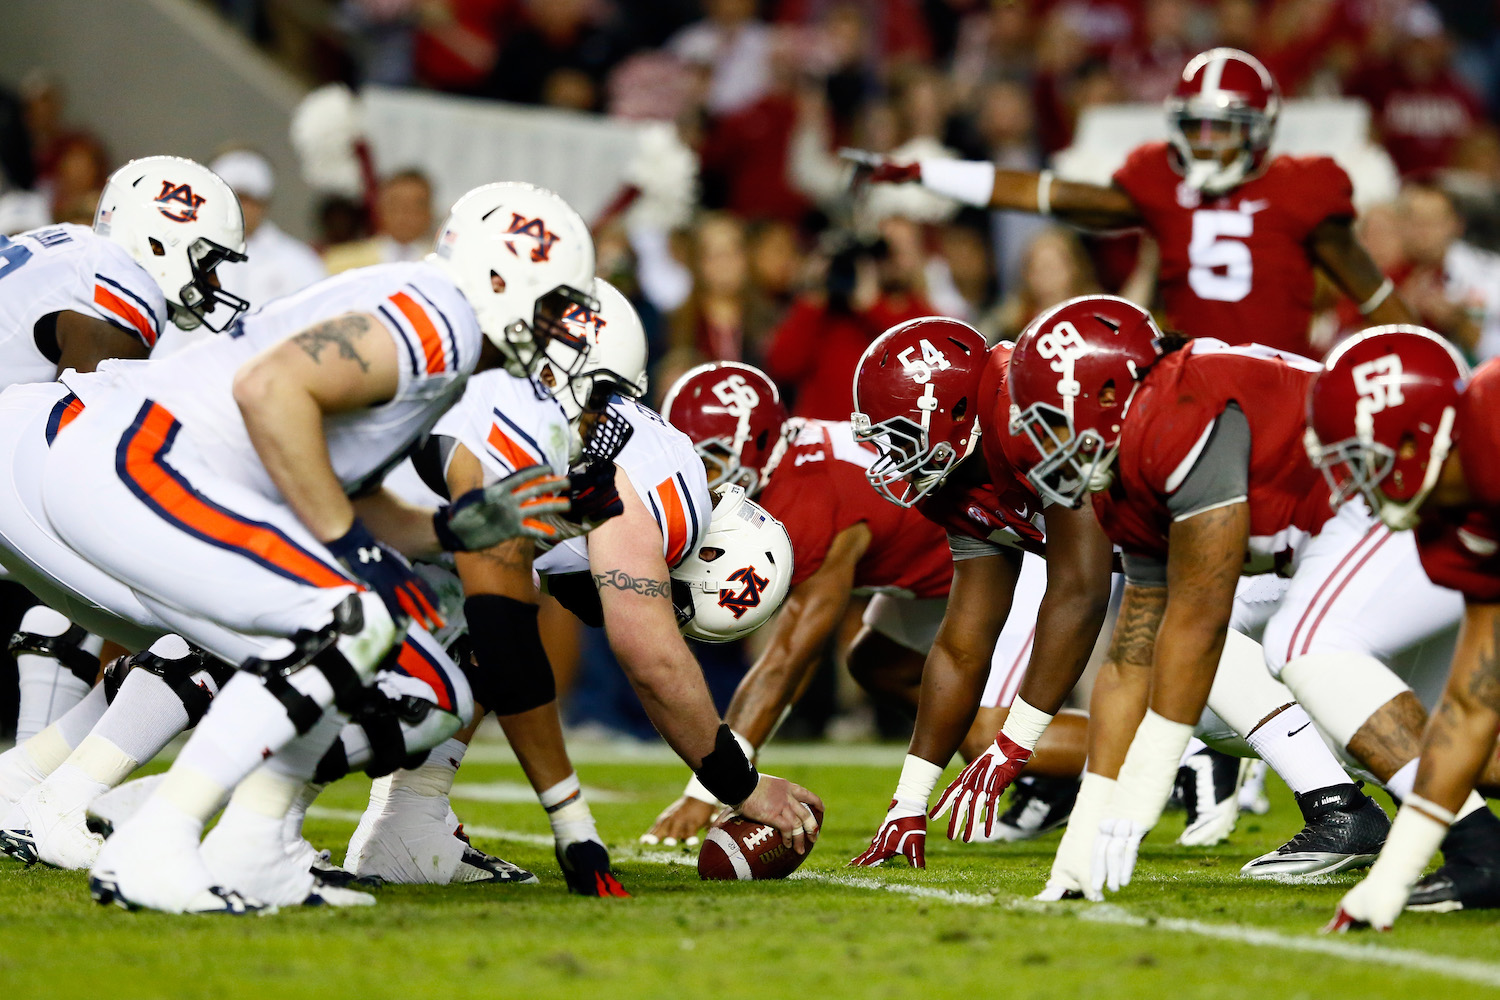 How Did the Iron Bowl Get Its Name and Does Alabama or Auburn Have More Wins?